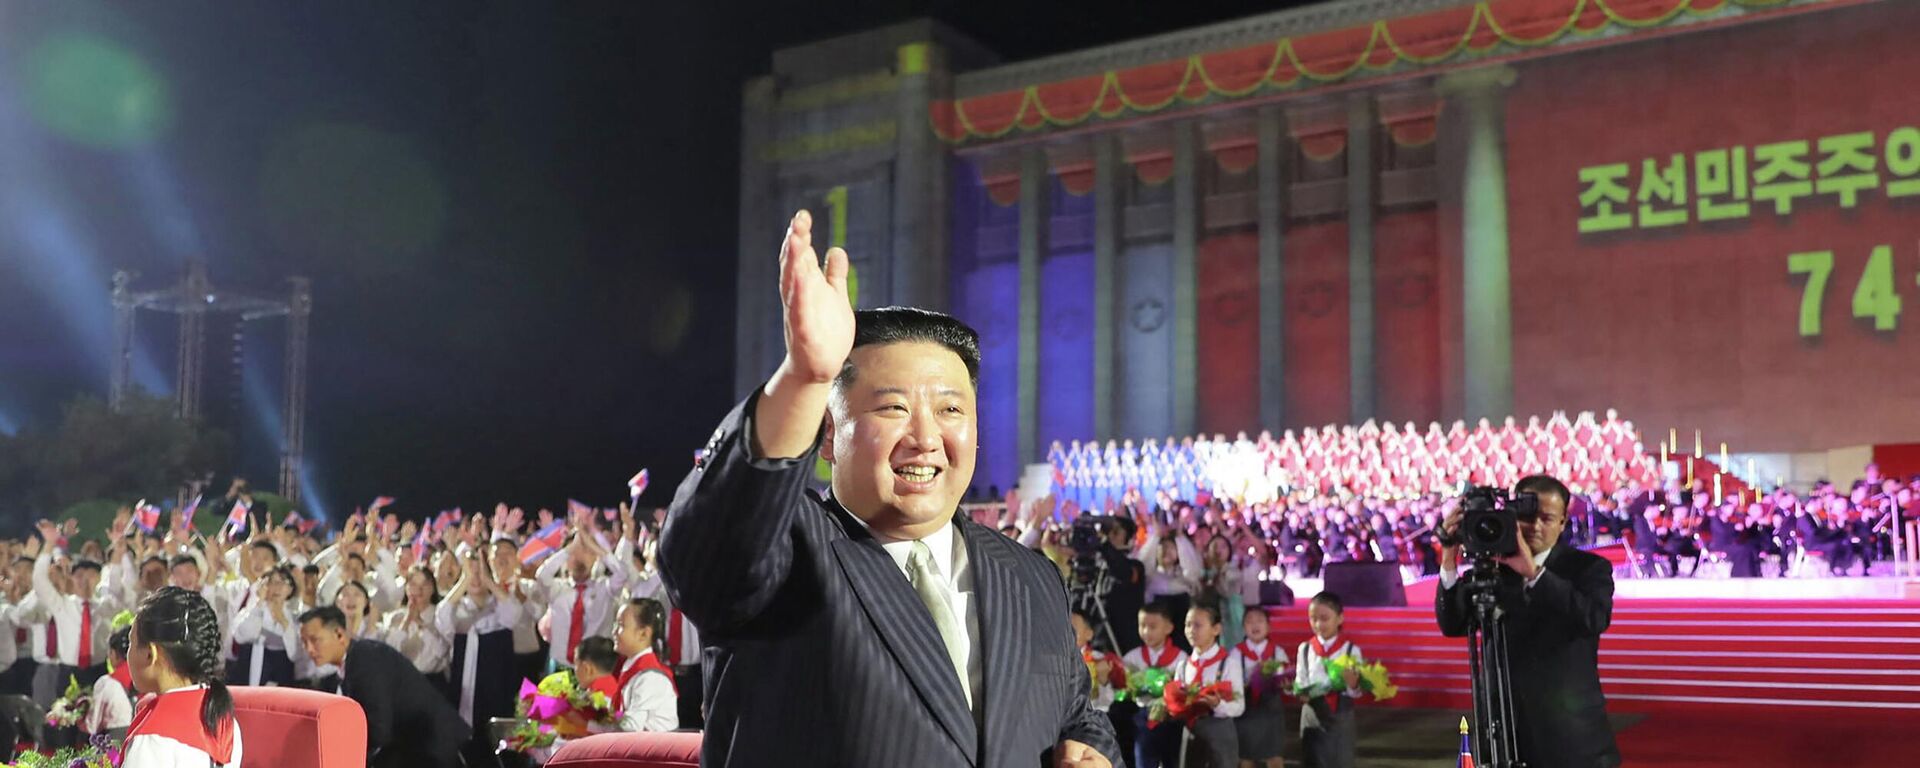 This picture taken on September 8, 2022 and released by North Korea's official Korean Central News Agency (KCNA) on September 9 shows North Korean leader Kim Jong Un attending a celebration event for the 74th anniversary of the nation's founding in Pyongyang - Sputnik International, 1920, 09.09.2022